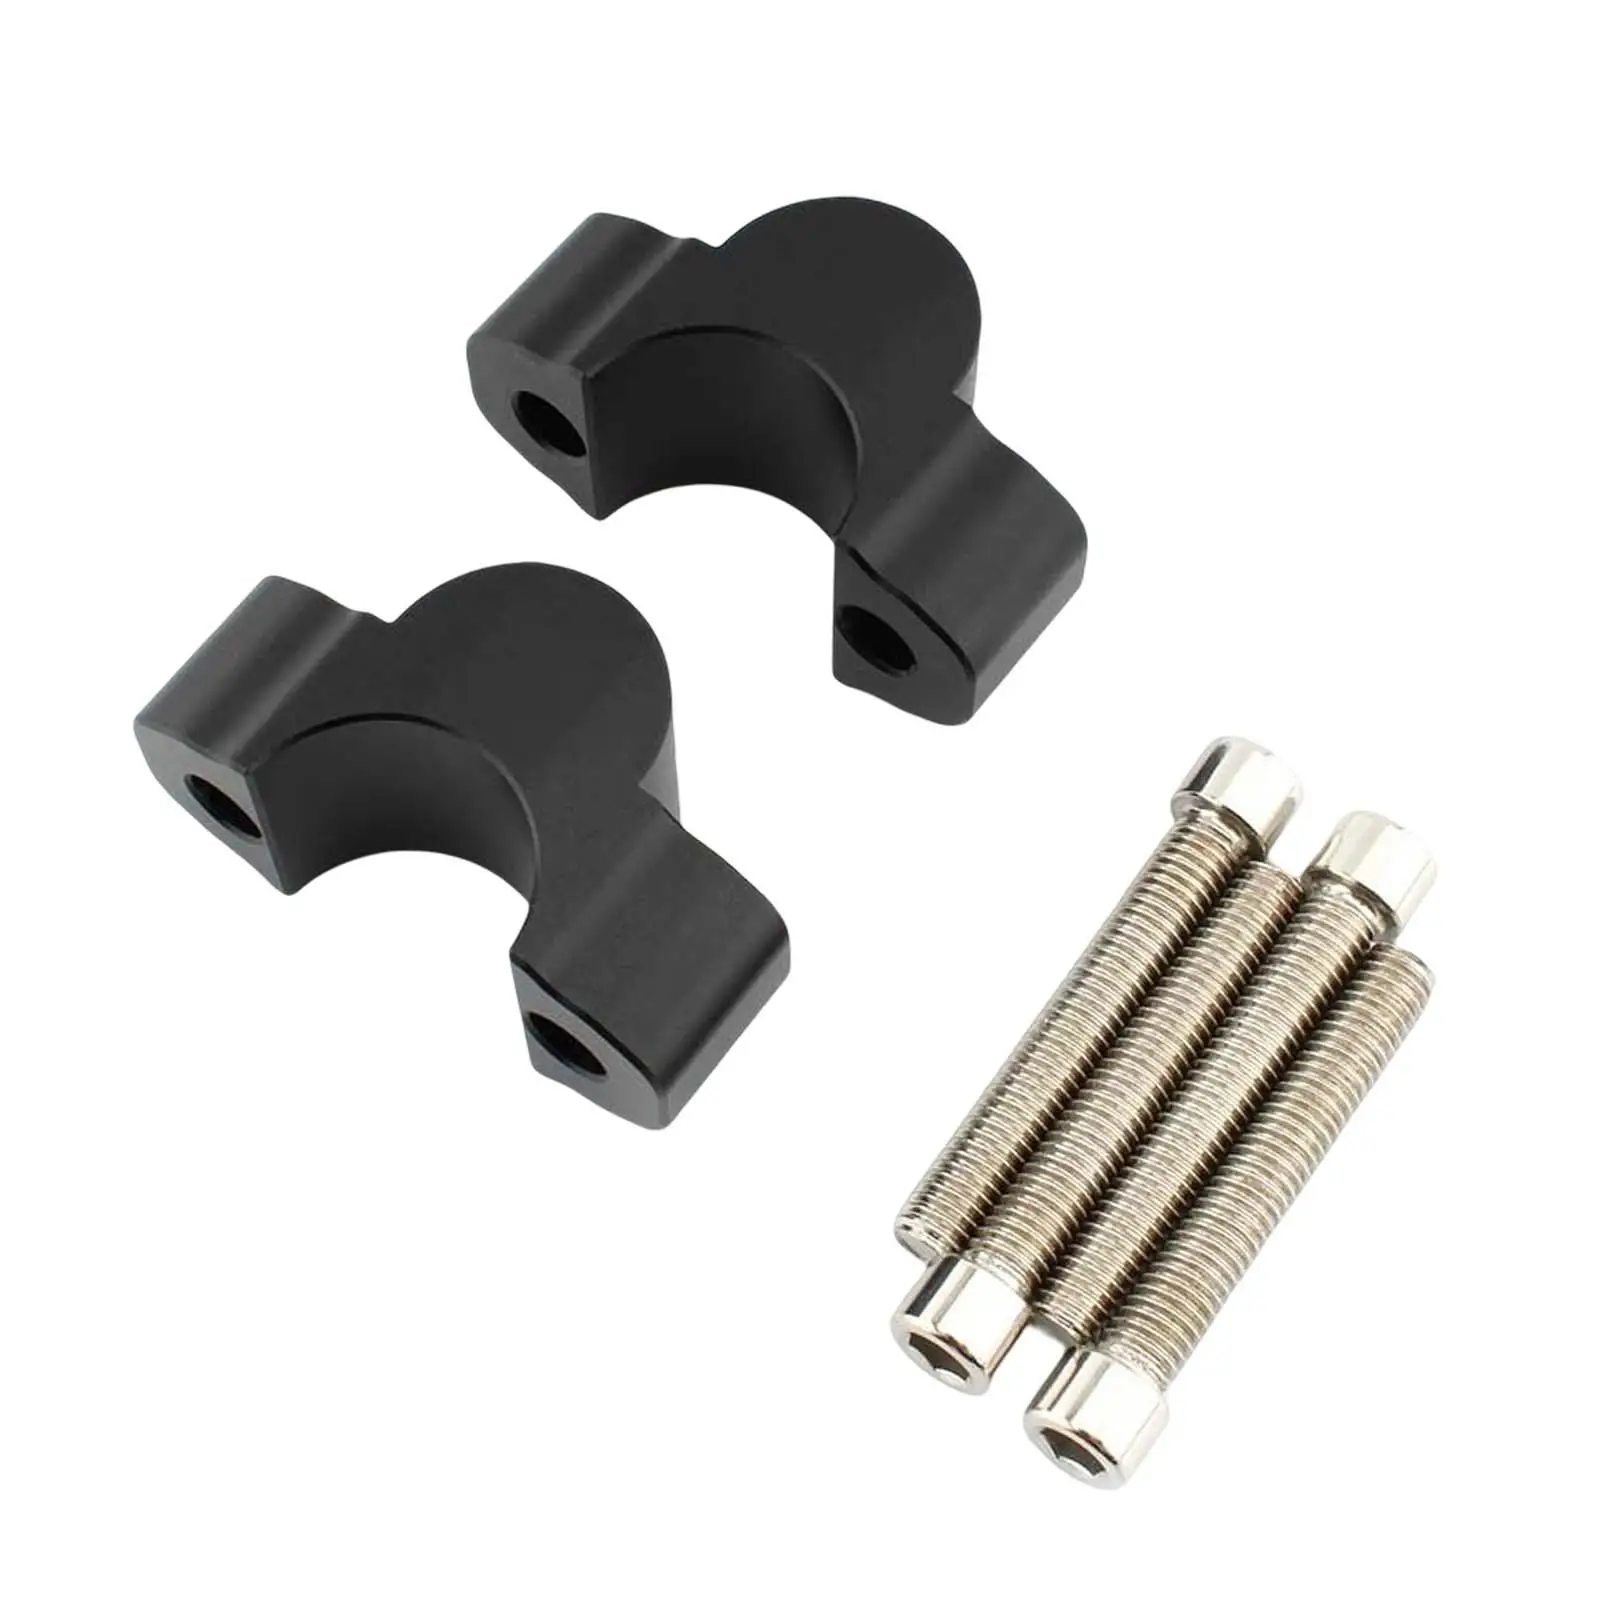 Handlebar Riser Clamps, Motorcycle Accessories, Clamp Mount Adapter, for